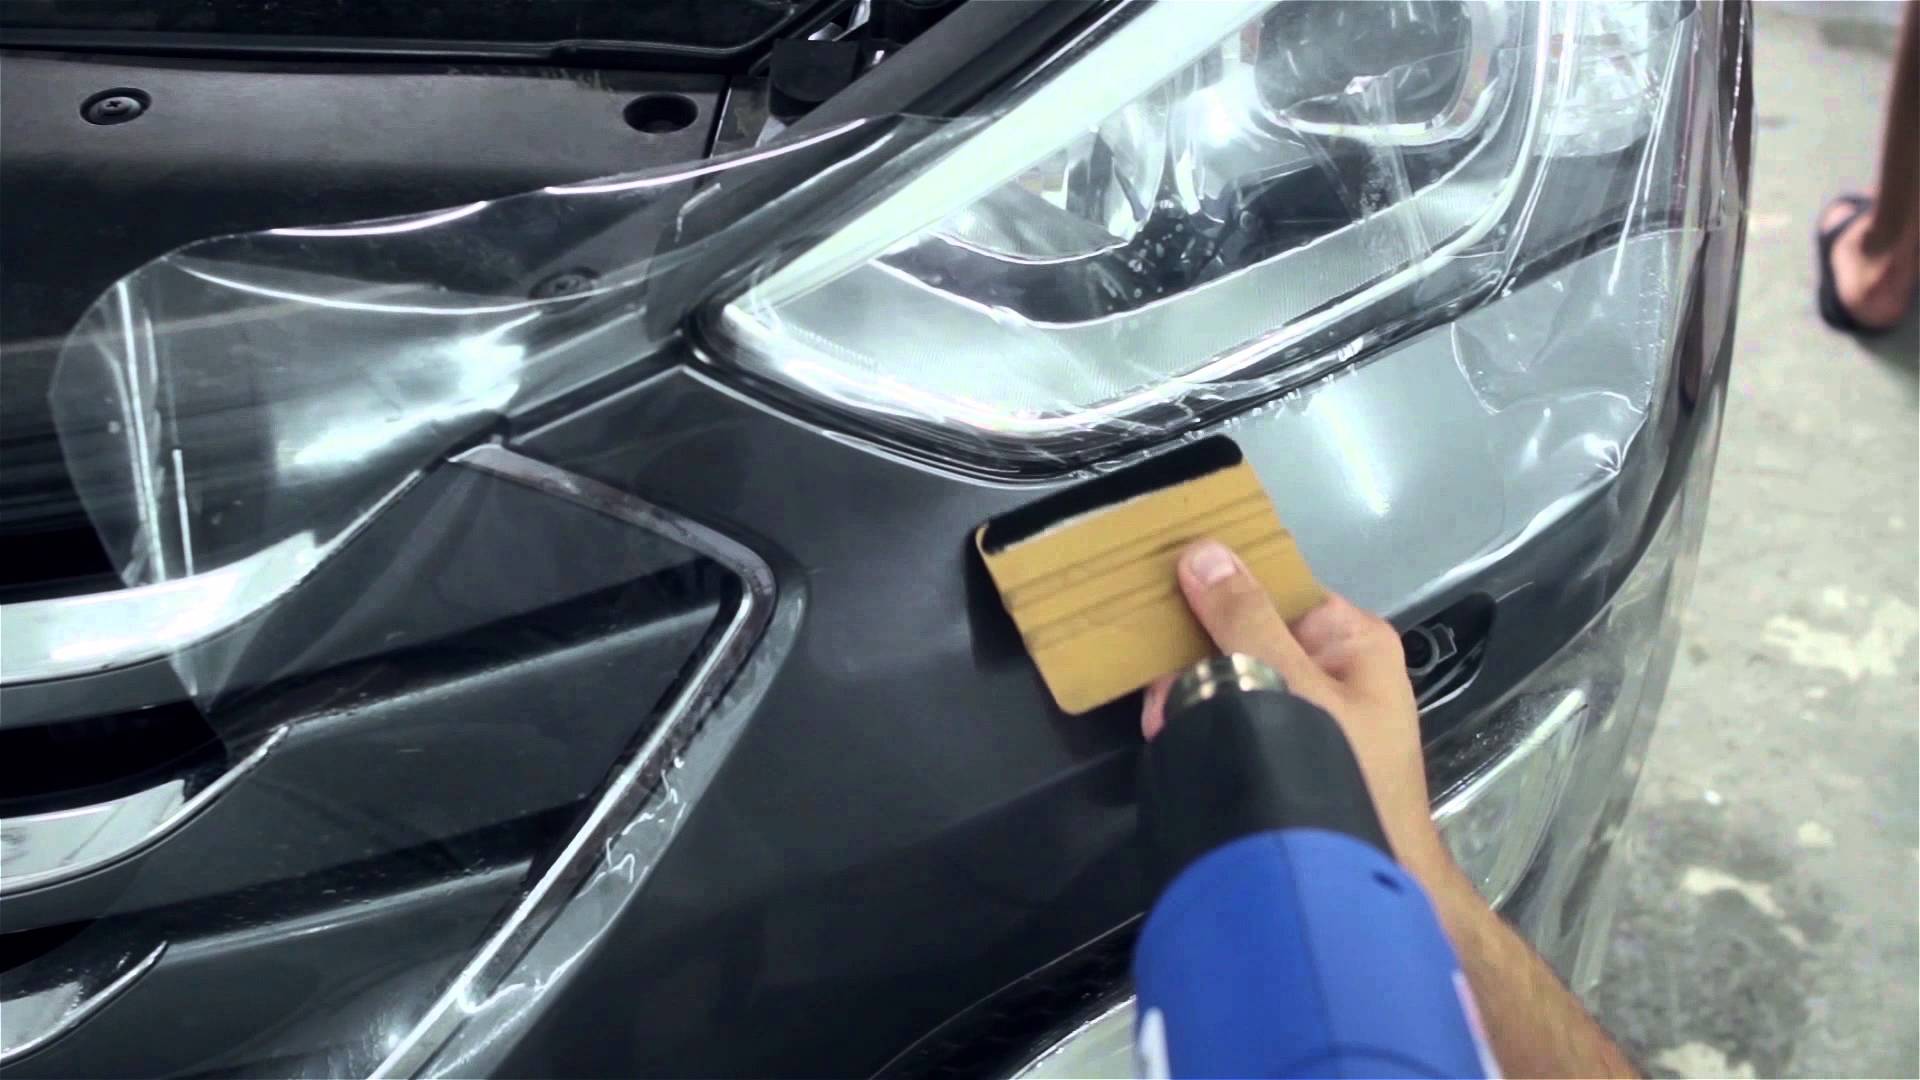 How to protect a bumper from scratches